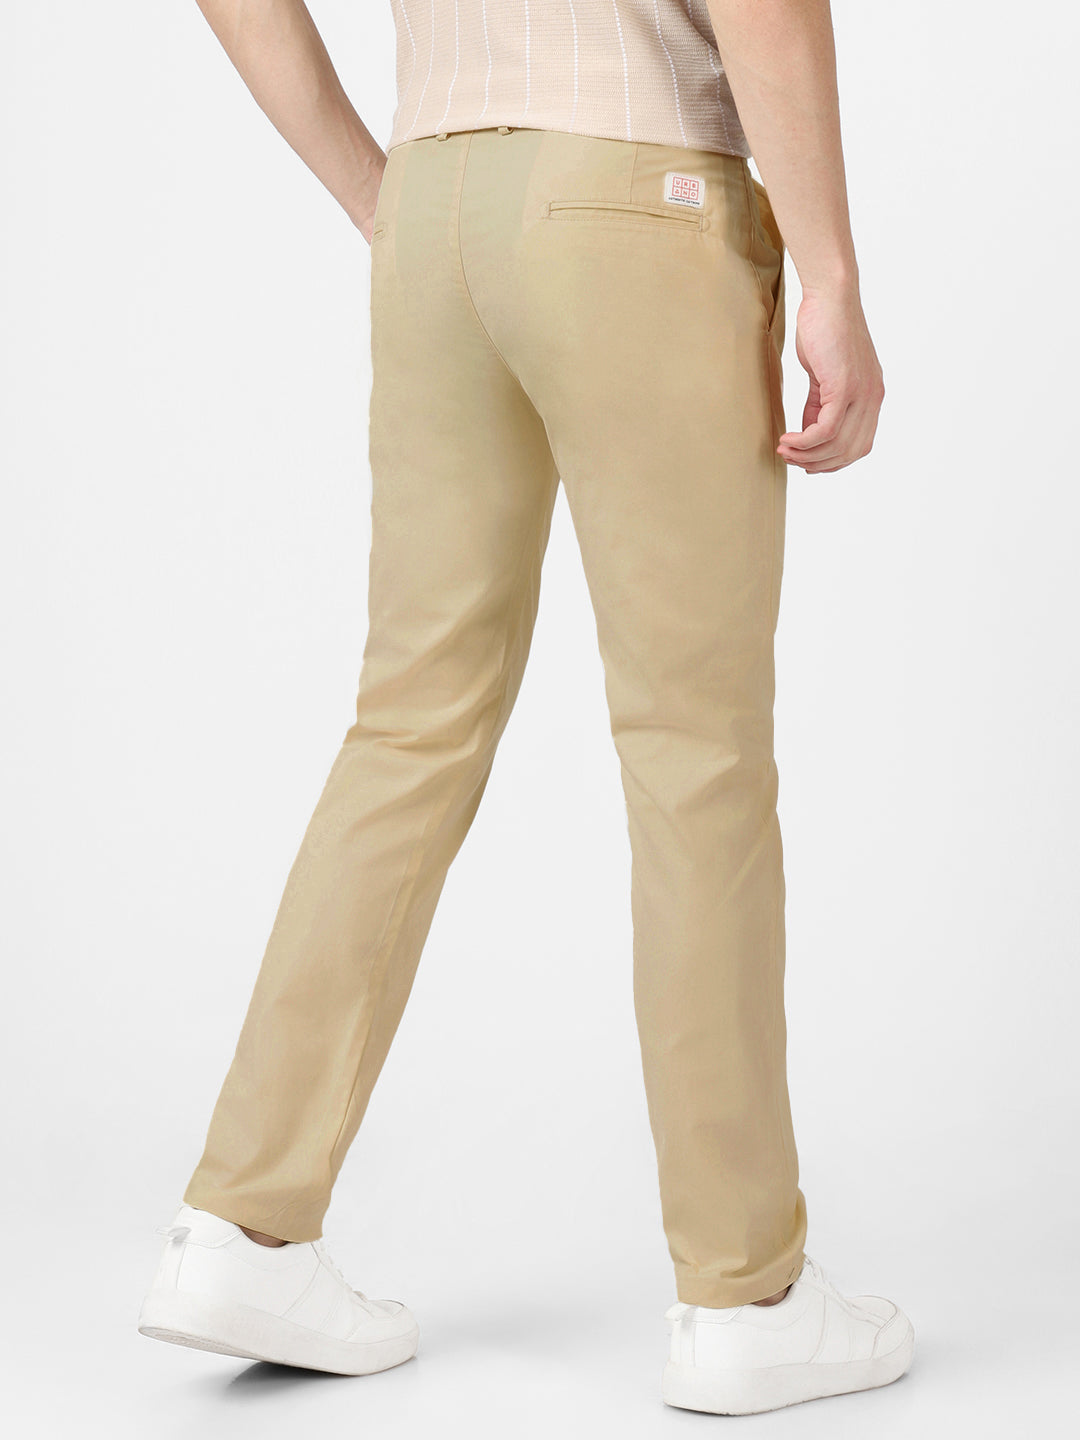 Men's Cream Cotton Light Weight Non-Stretch Slim Fit Casual Trousers